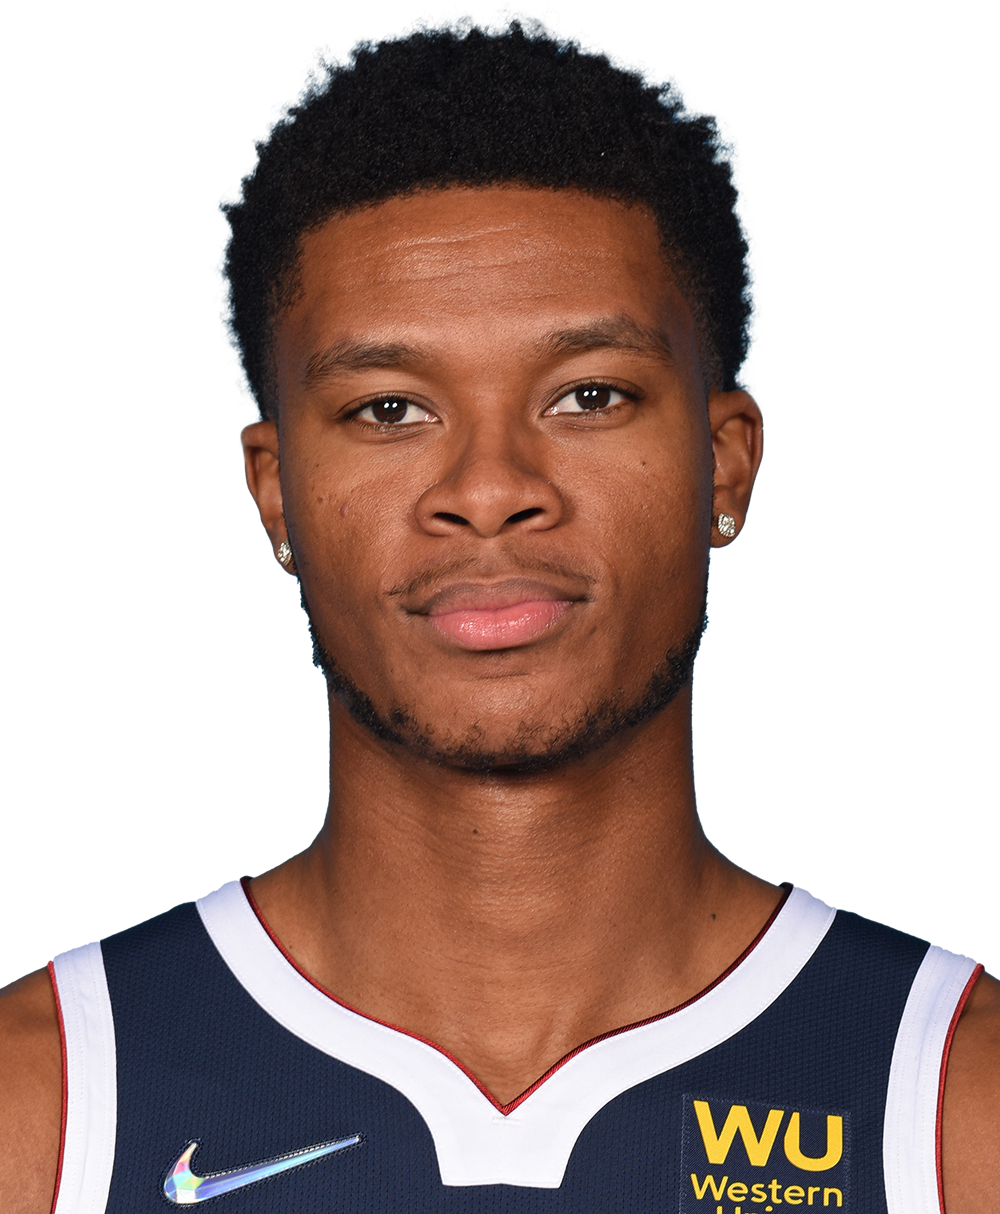 Kings Sign PJ Dozier To 10-Day Contract